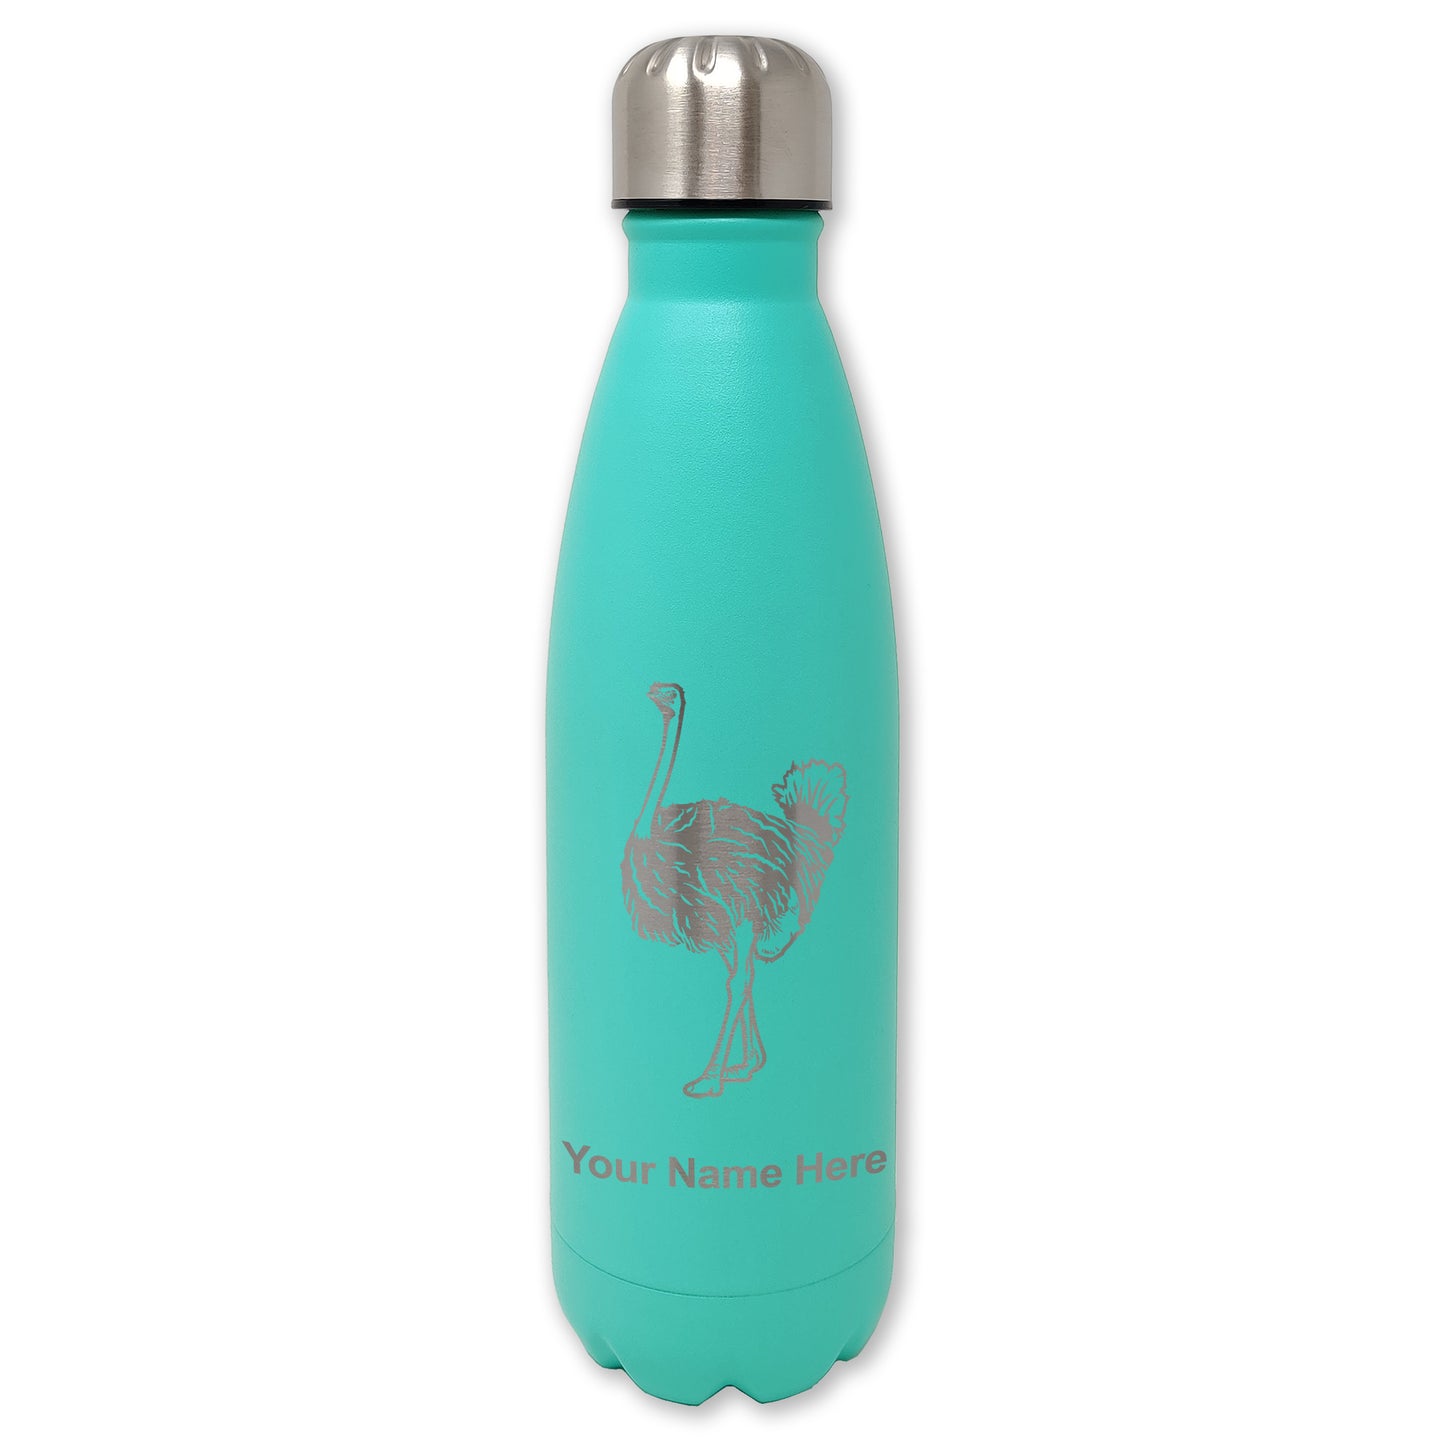 LaserGram Double Wall Water Bottle, Ostrich, Personalized Engraving Included